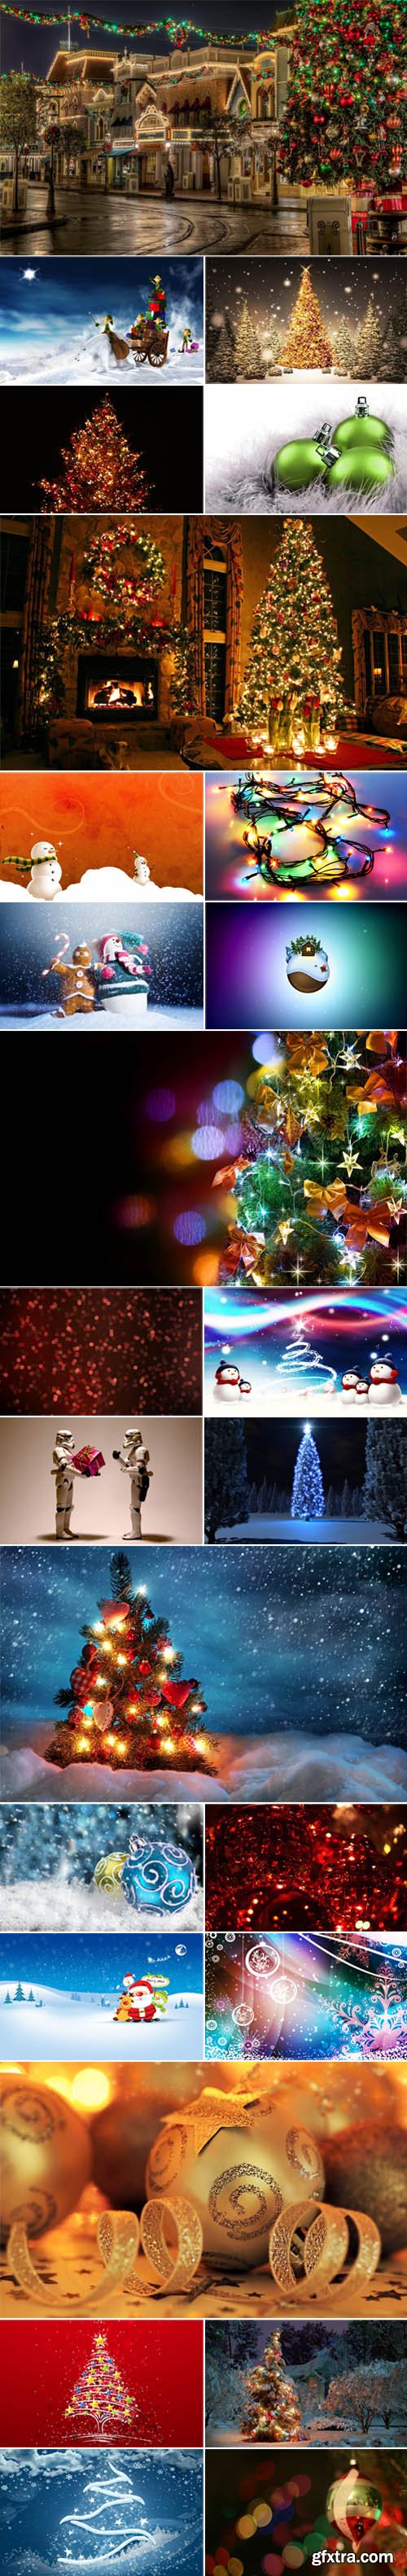 25 Super HD Christmas Wallpapers + 25 Christmas Facebook Covers